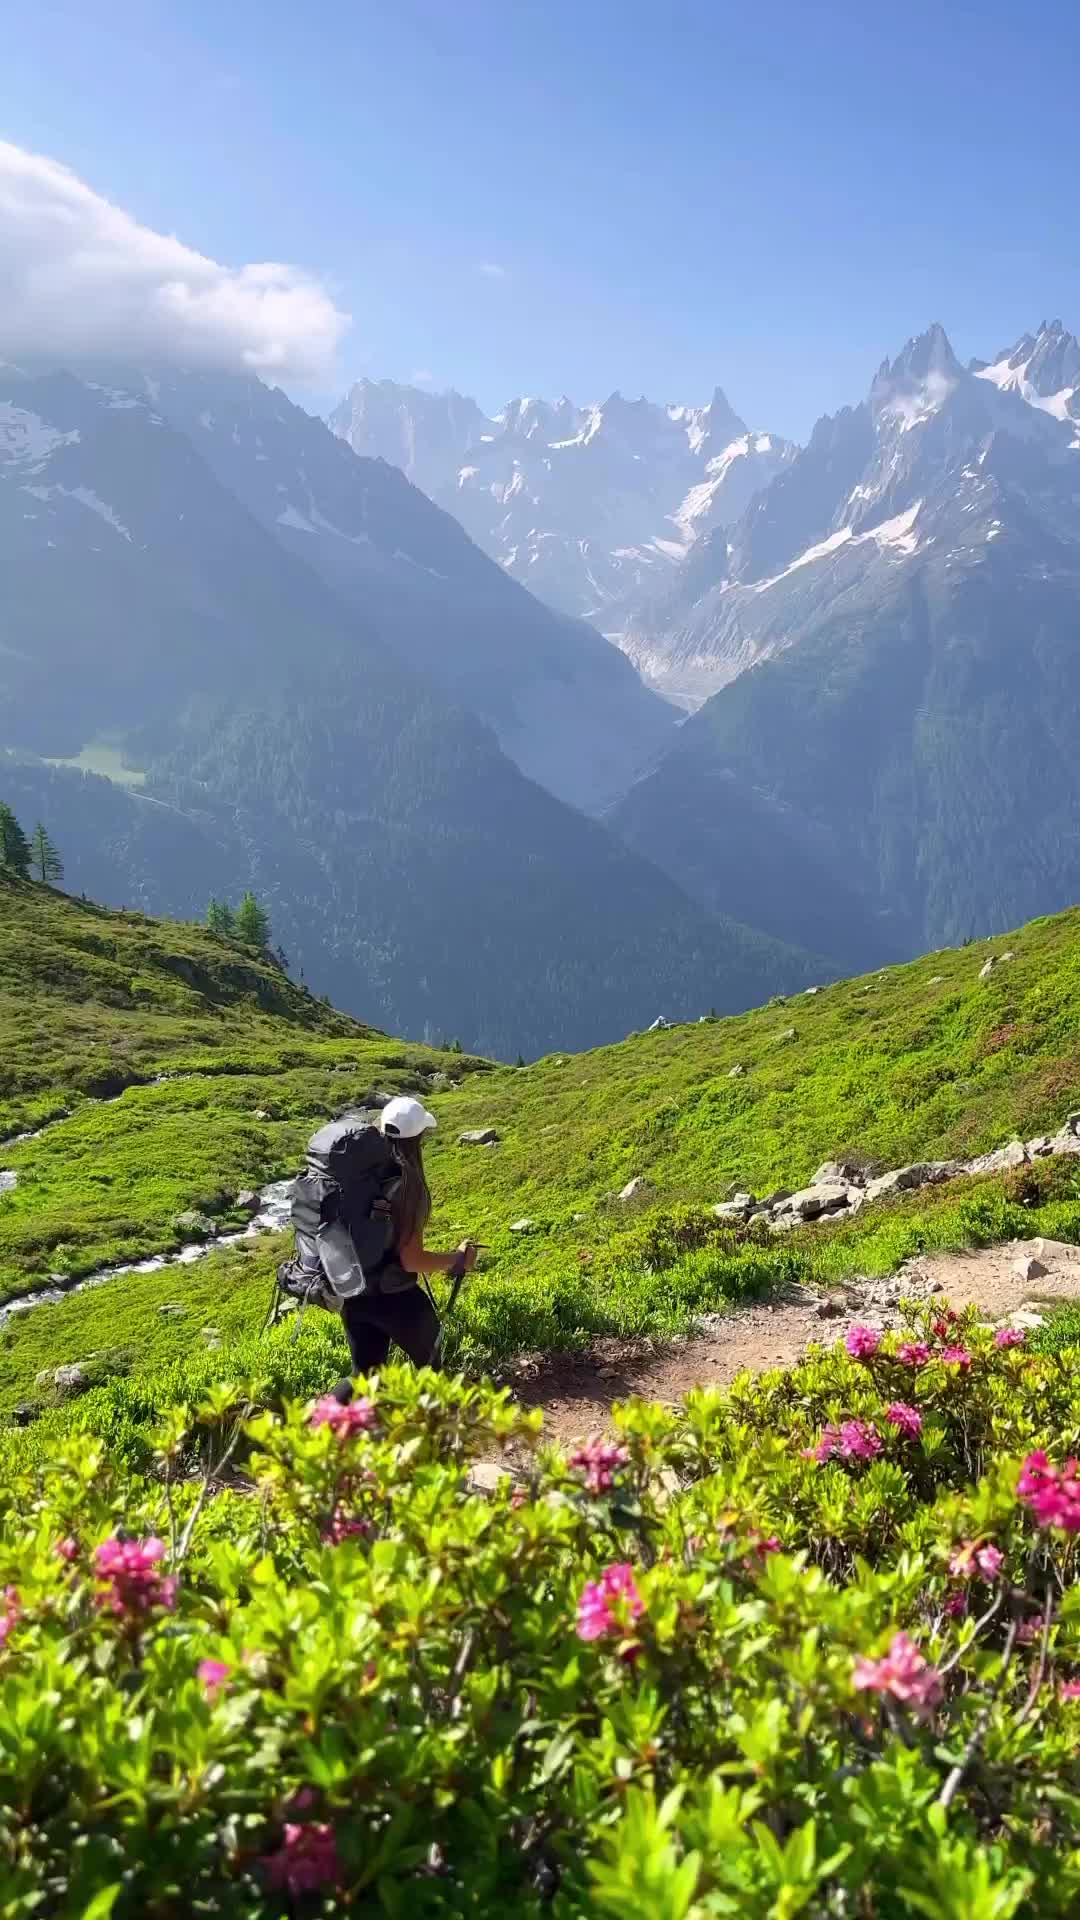 Explore the Stunning French Alps in Chamonix